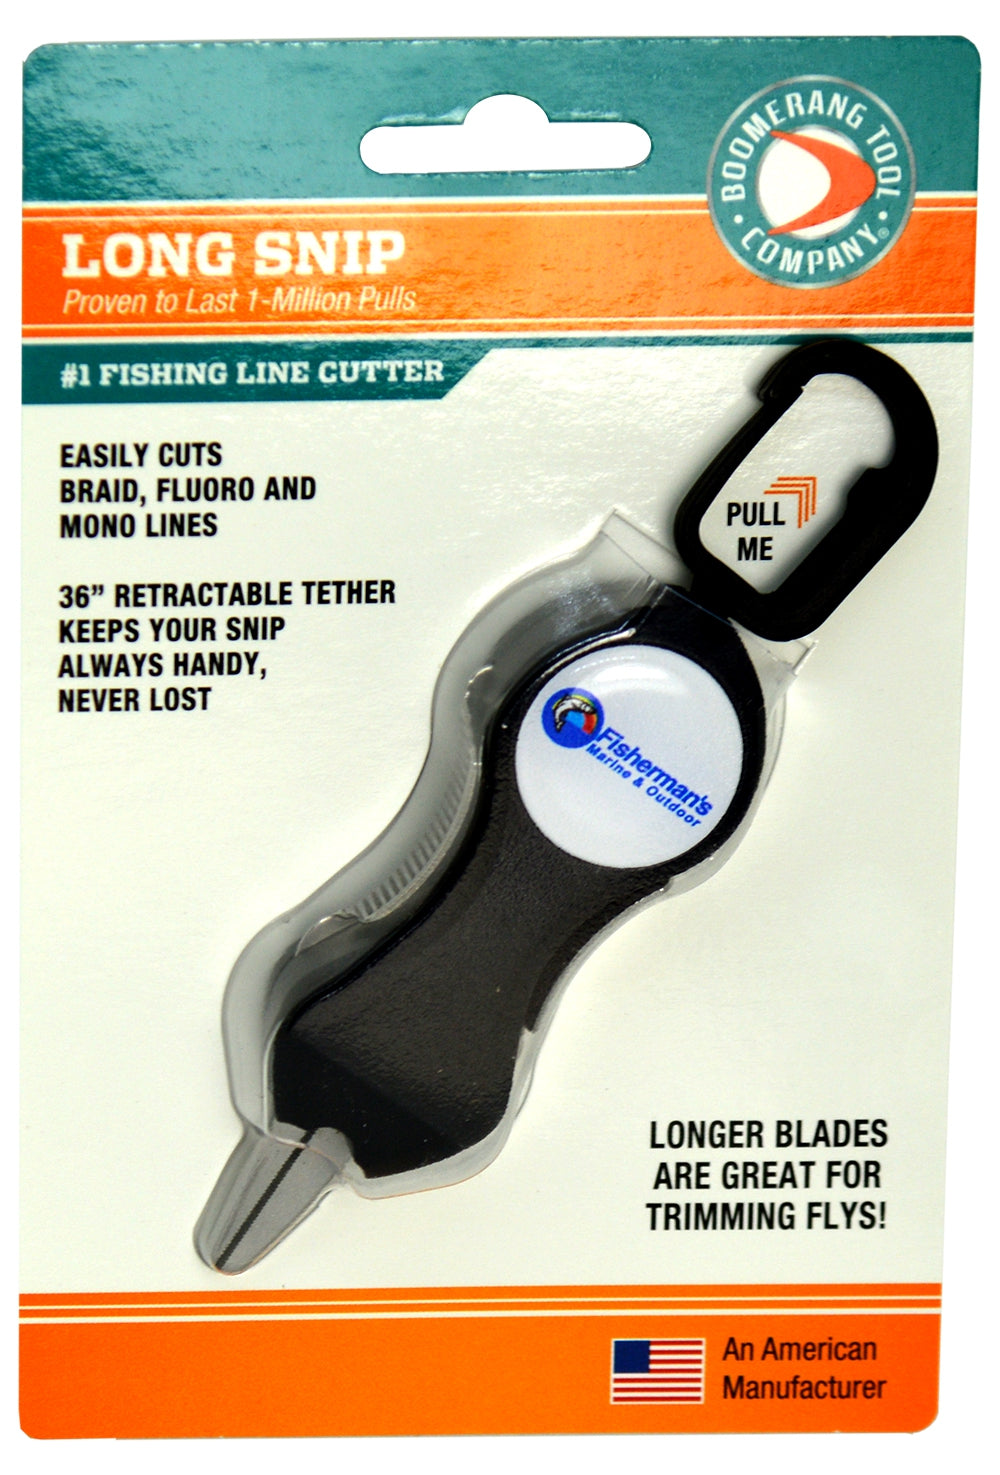 Boomerang Tool Company Long Snip Fishing Line Cutter for Fly